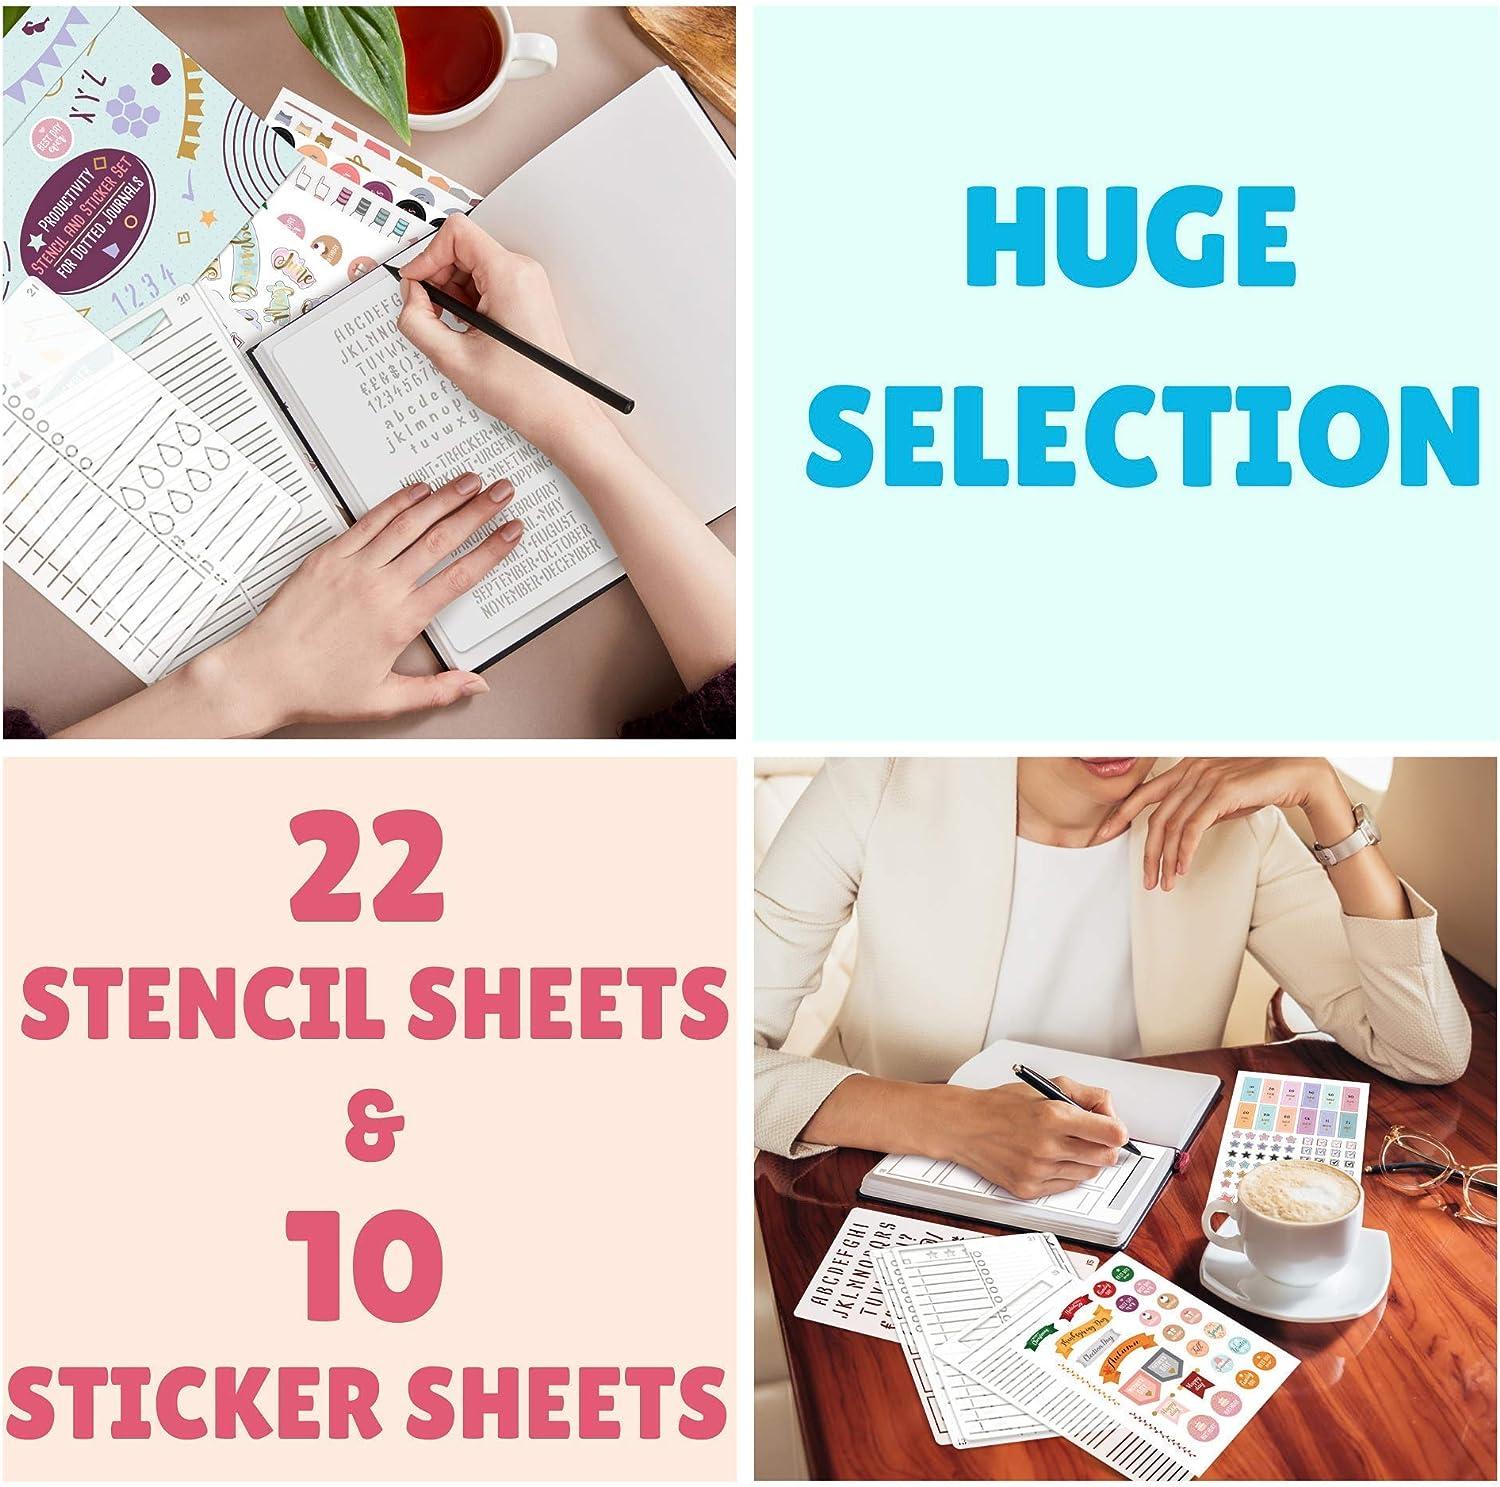  16Pcs Journal Stencils Set - Time Saving Bullet Journaling  Supplies/Accessories Kit -Ultimate Productivity Planner Stencil for Bullet  Journal Stencils A5 Dotted Journals : Arts, Crafts & Sewing